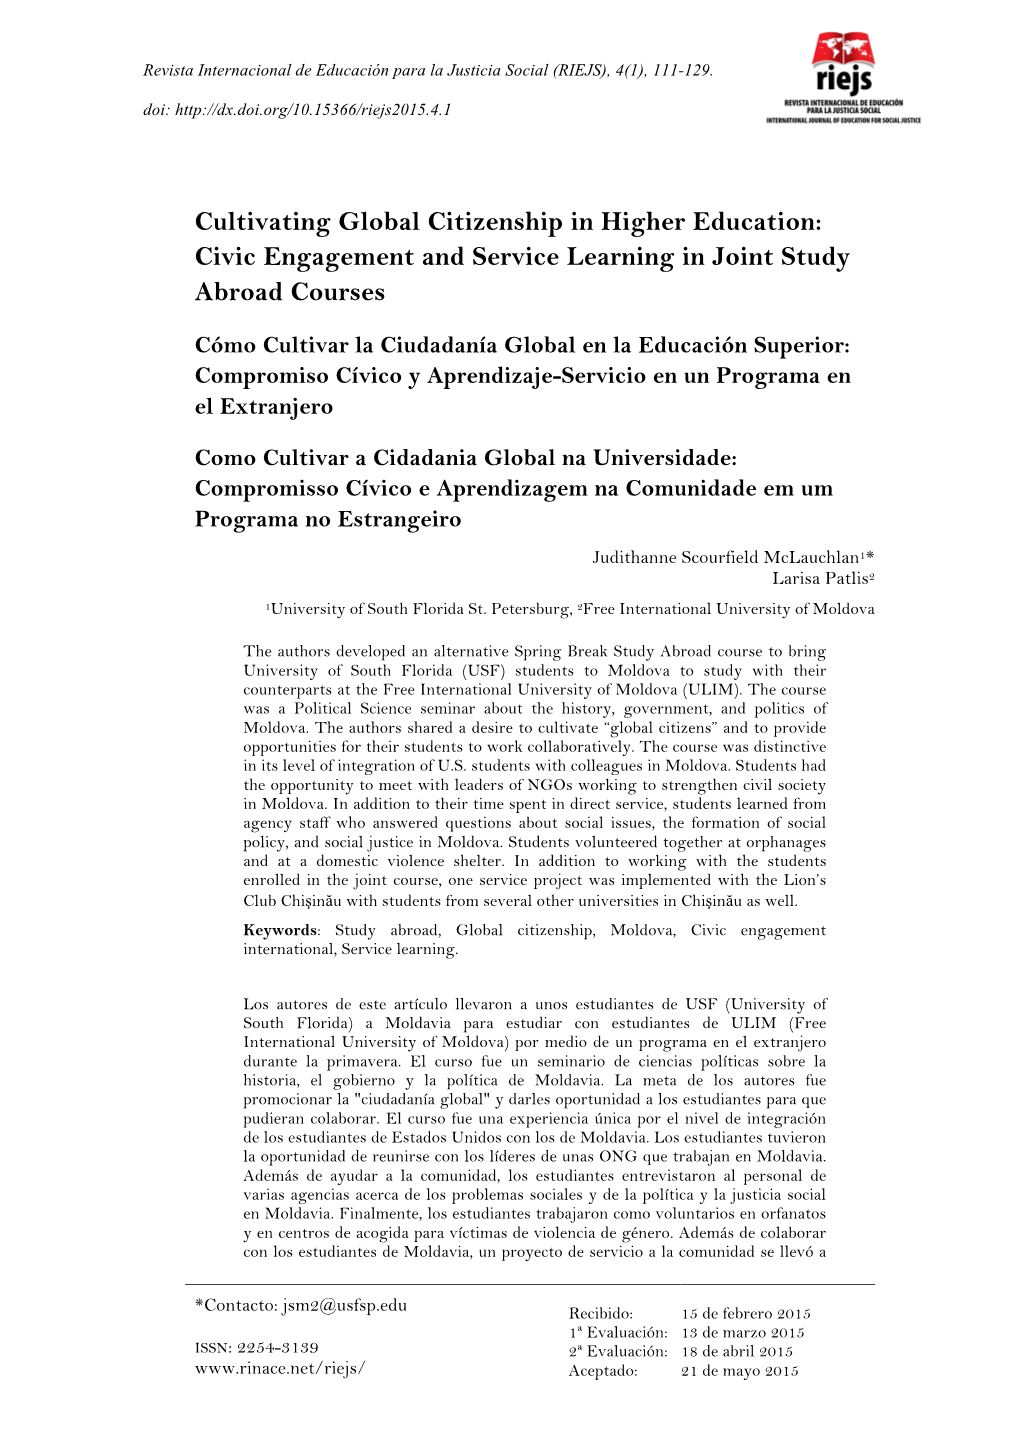 Cultivating Global Citizenship in Higher Education: Civic Engagement and Service Learning in Joint Study Abroad Courses